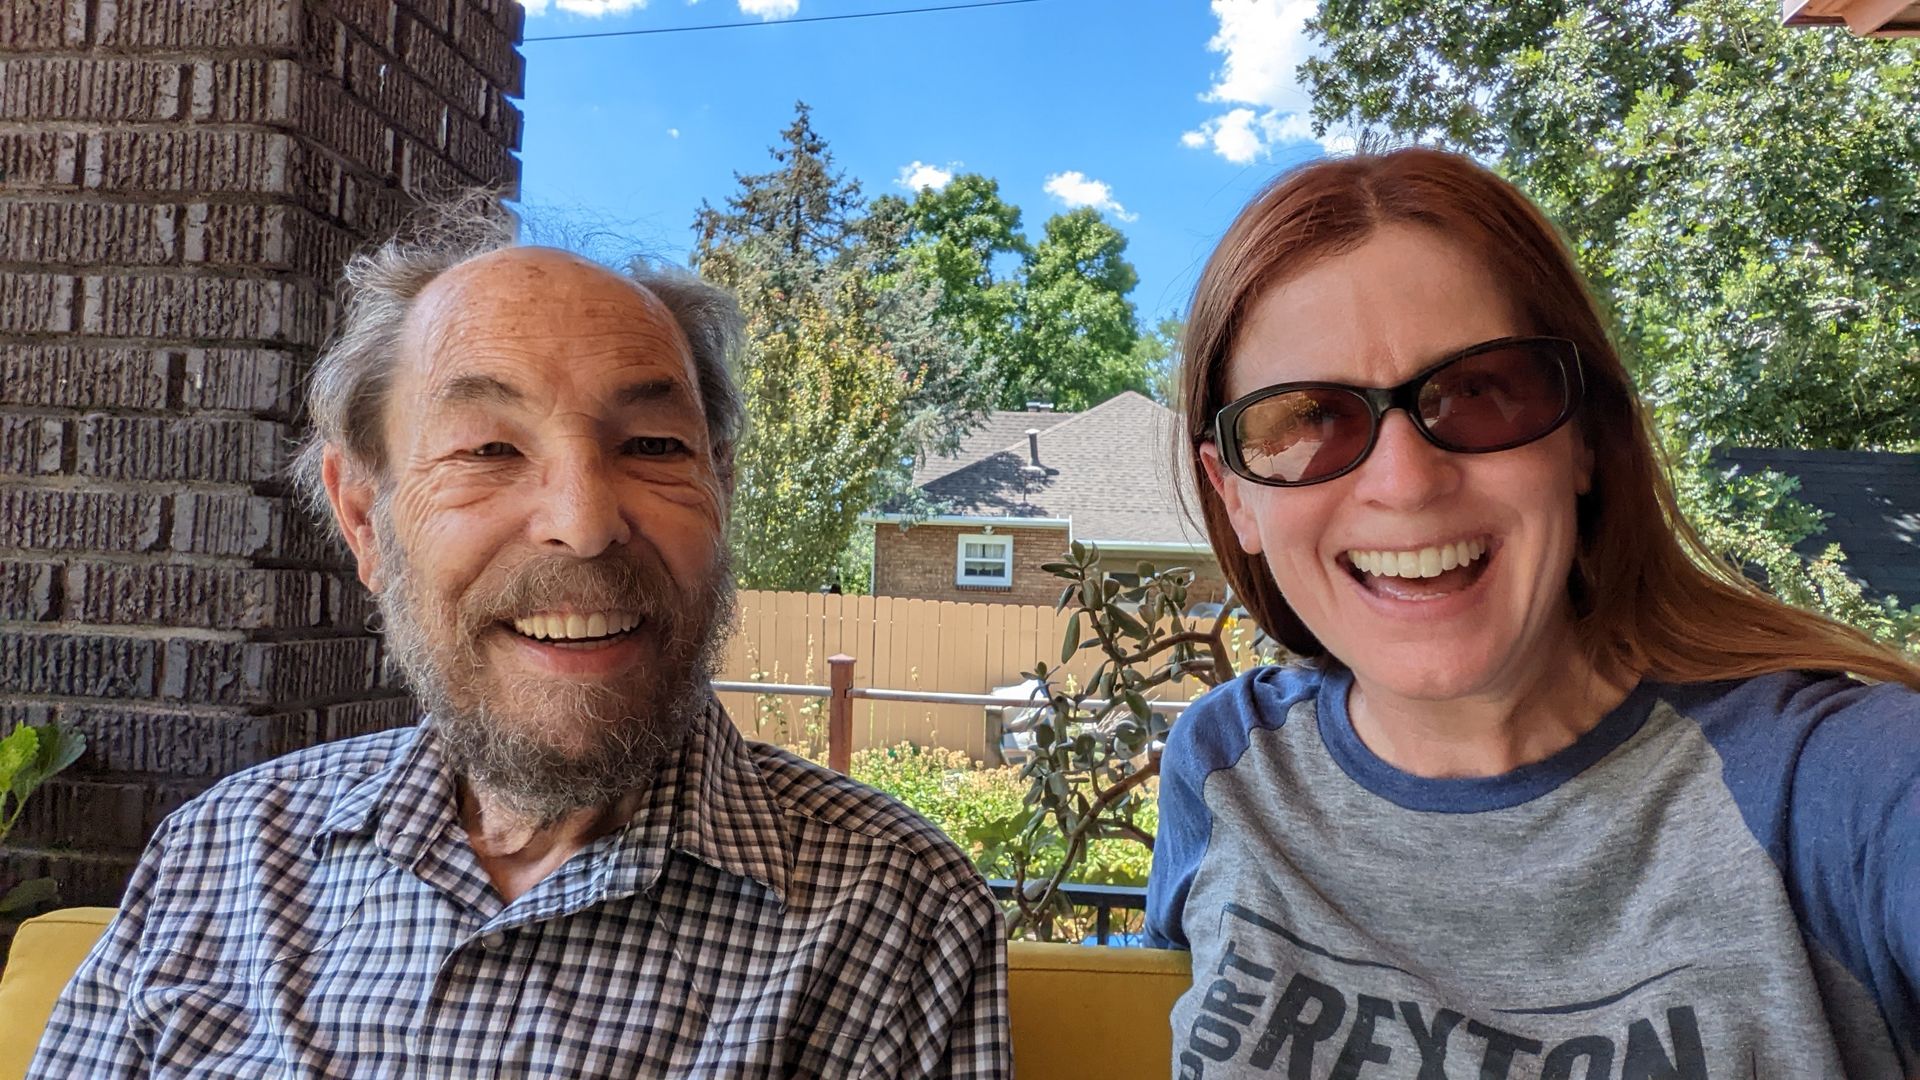 A 74-year-old man and a 53-year-old woman sit on a porch swing together. 